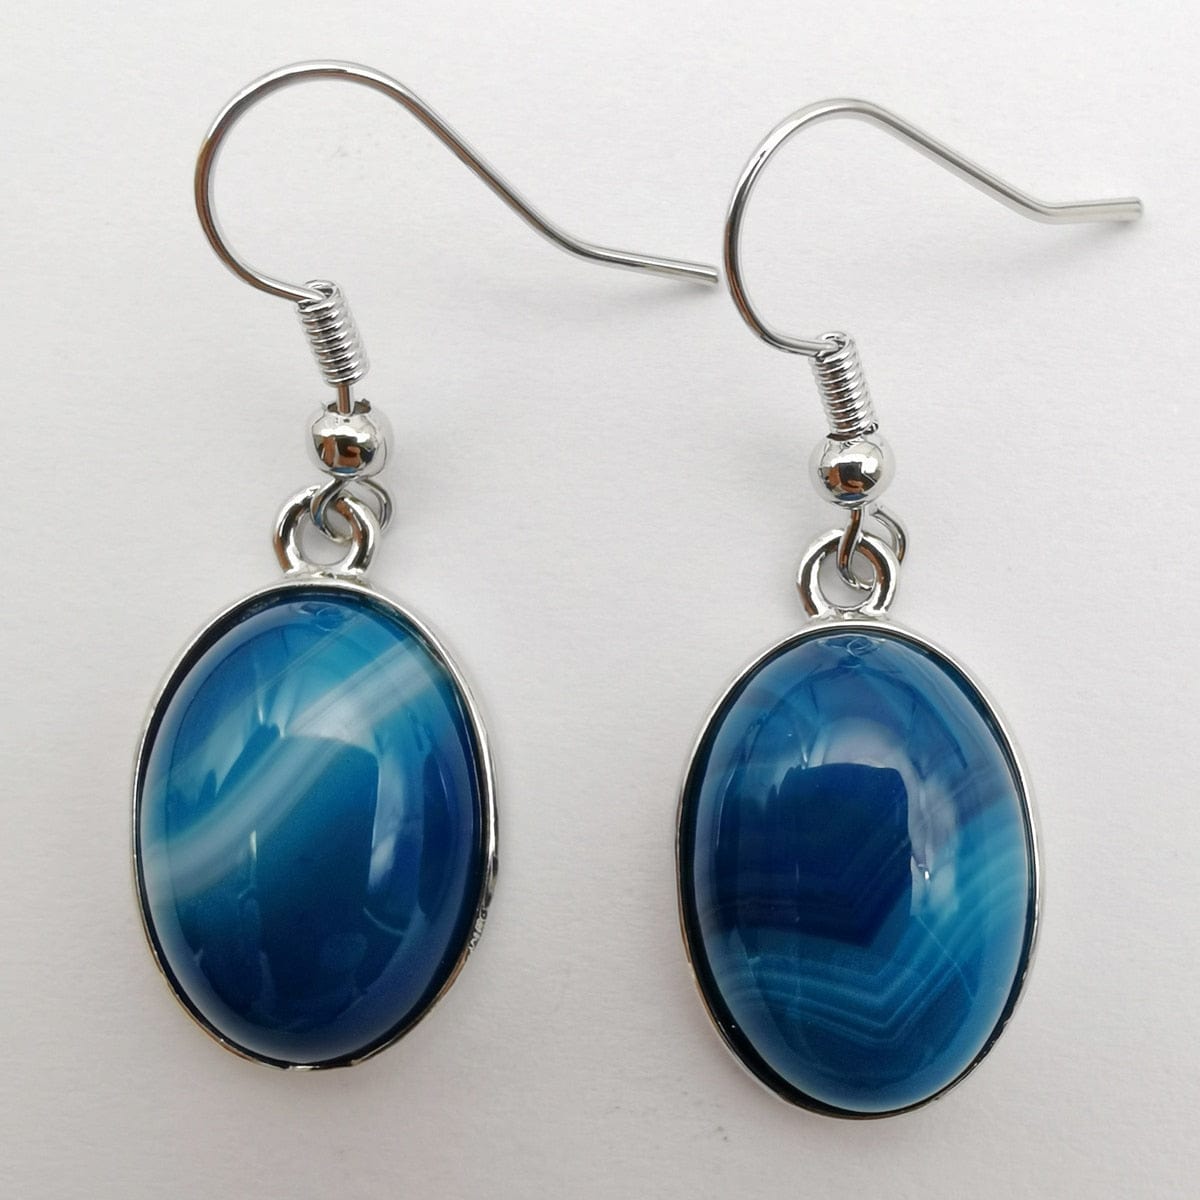 Buddhatrends Blue Veins Agate Natural Stone Oval Earrings